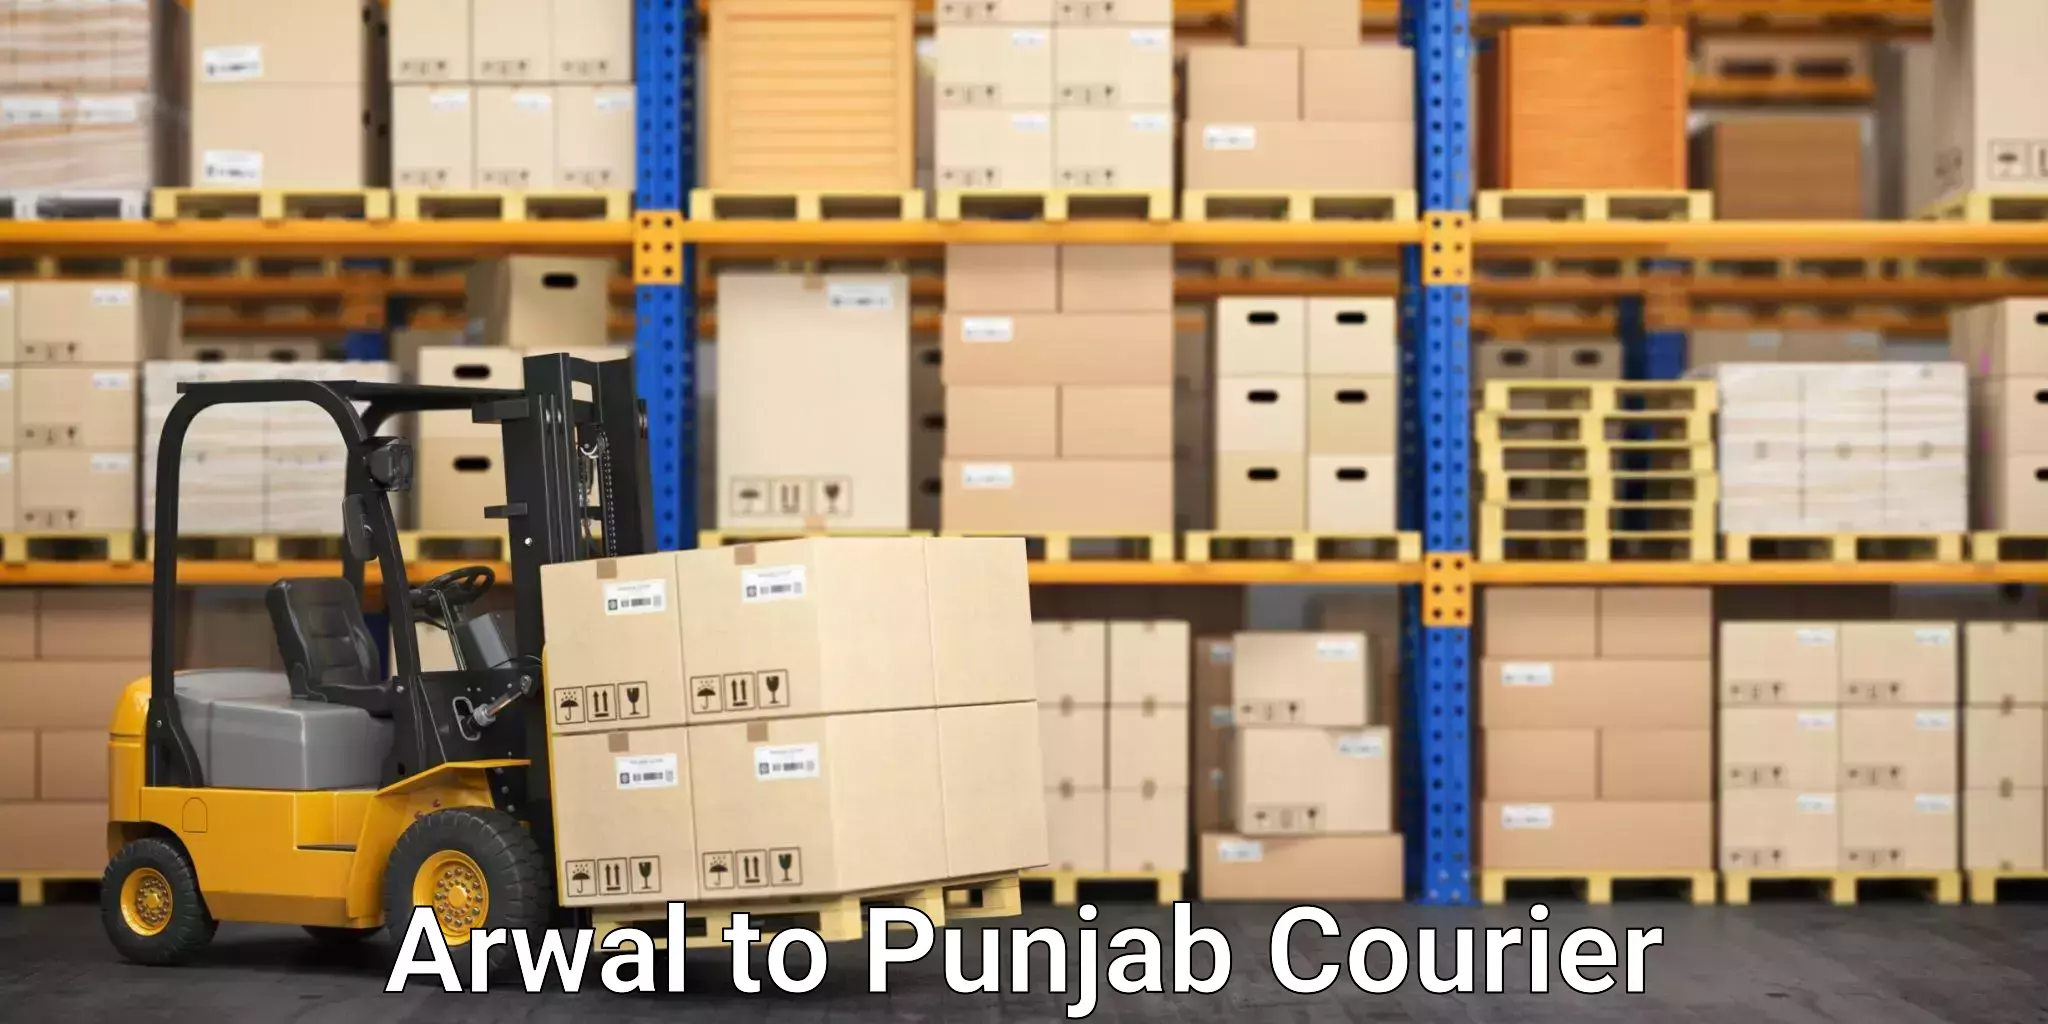 Household goods movers Arwal to Punjab